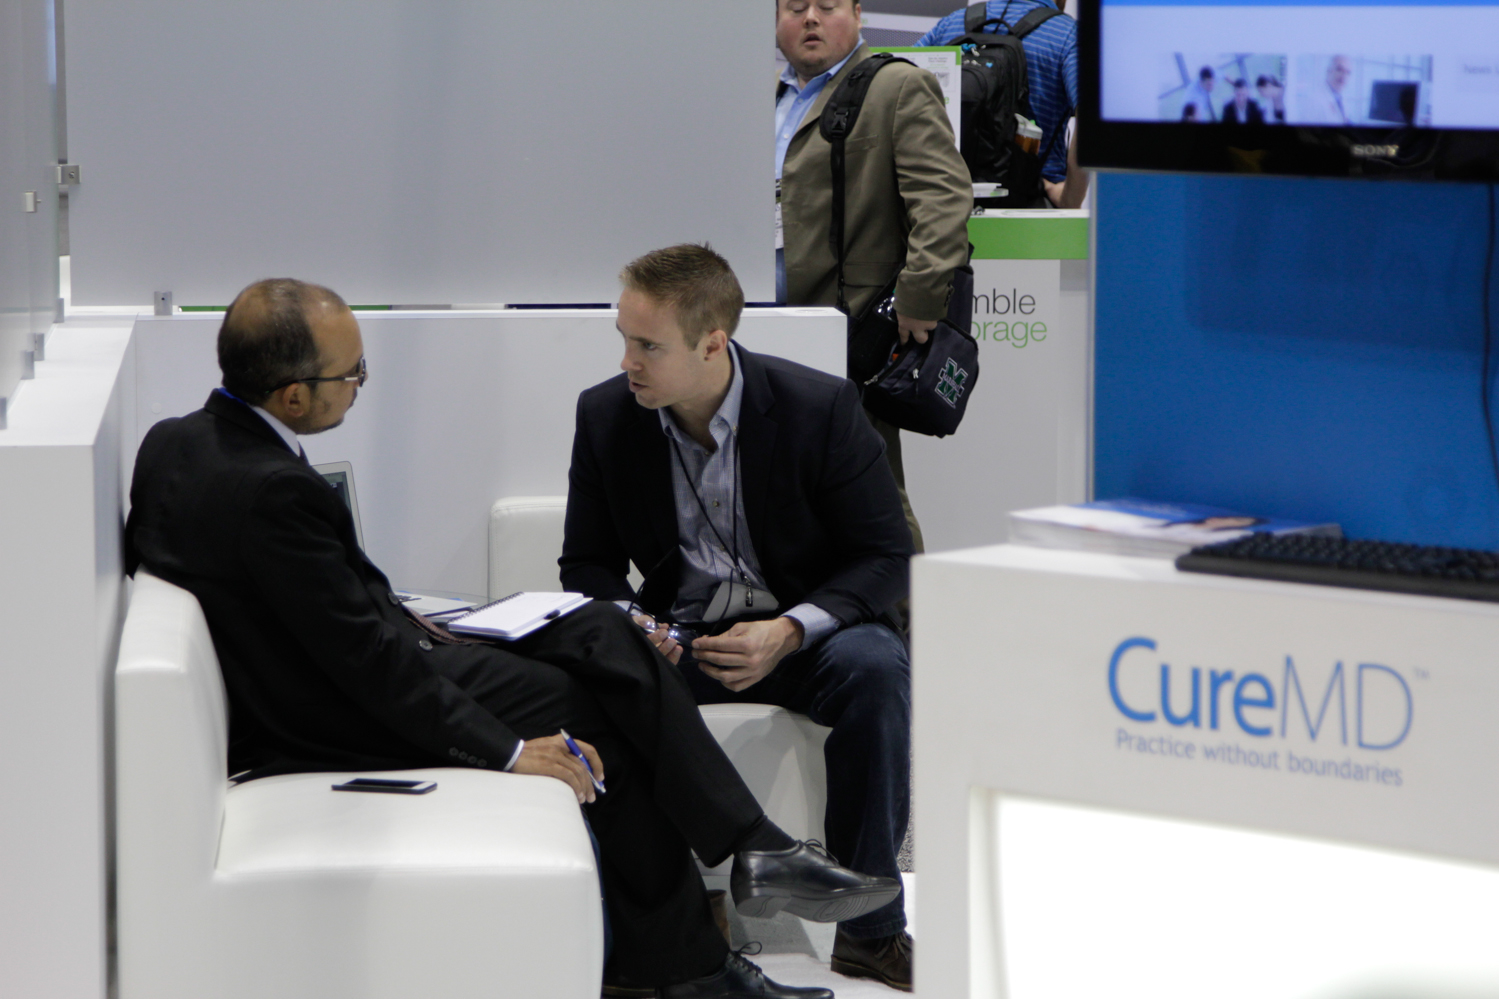 CureMD Team at HIMSS 2015